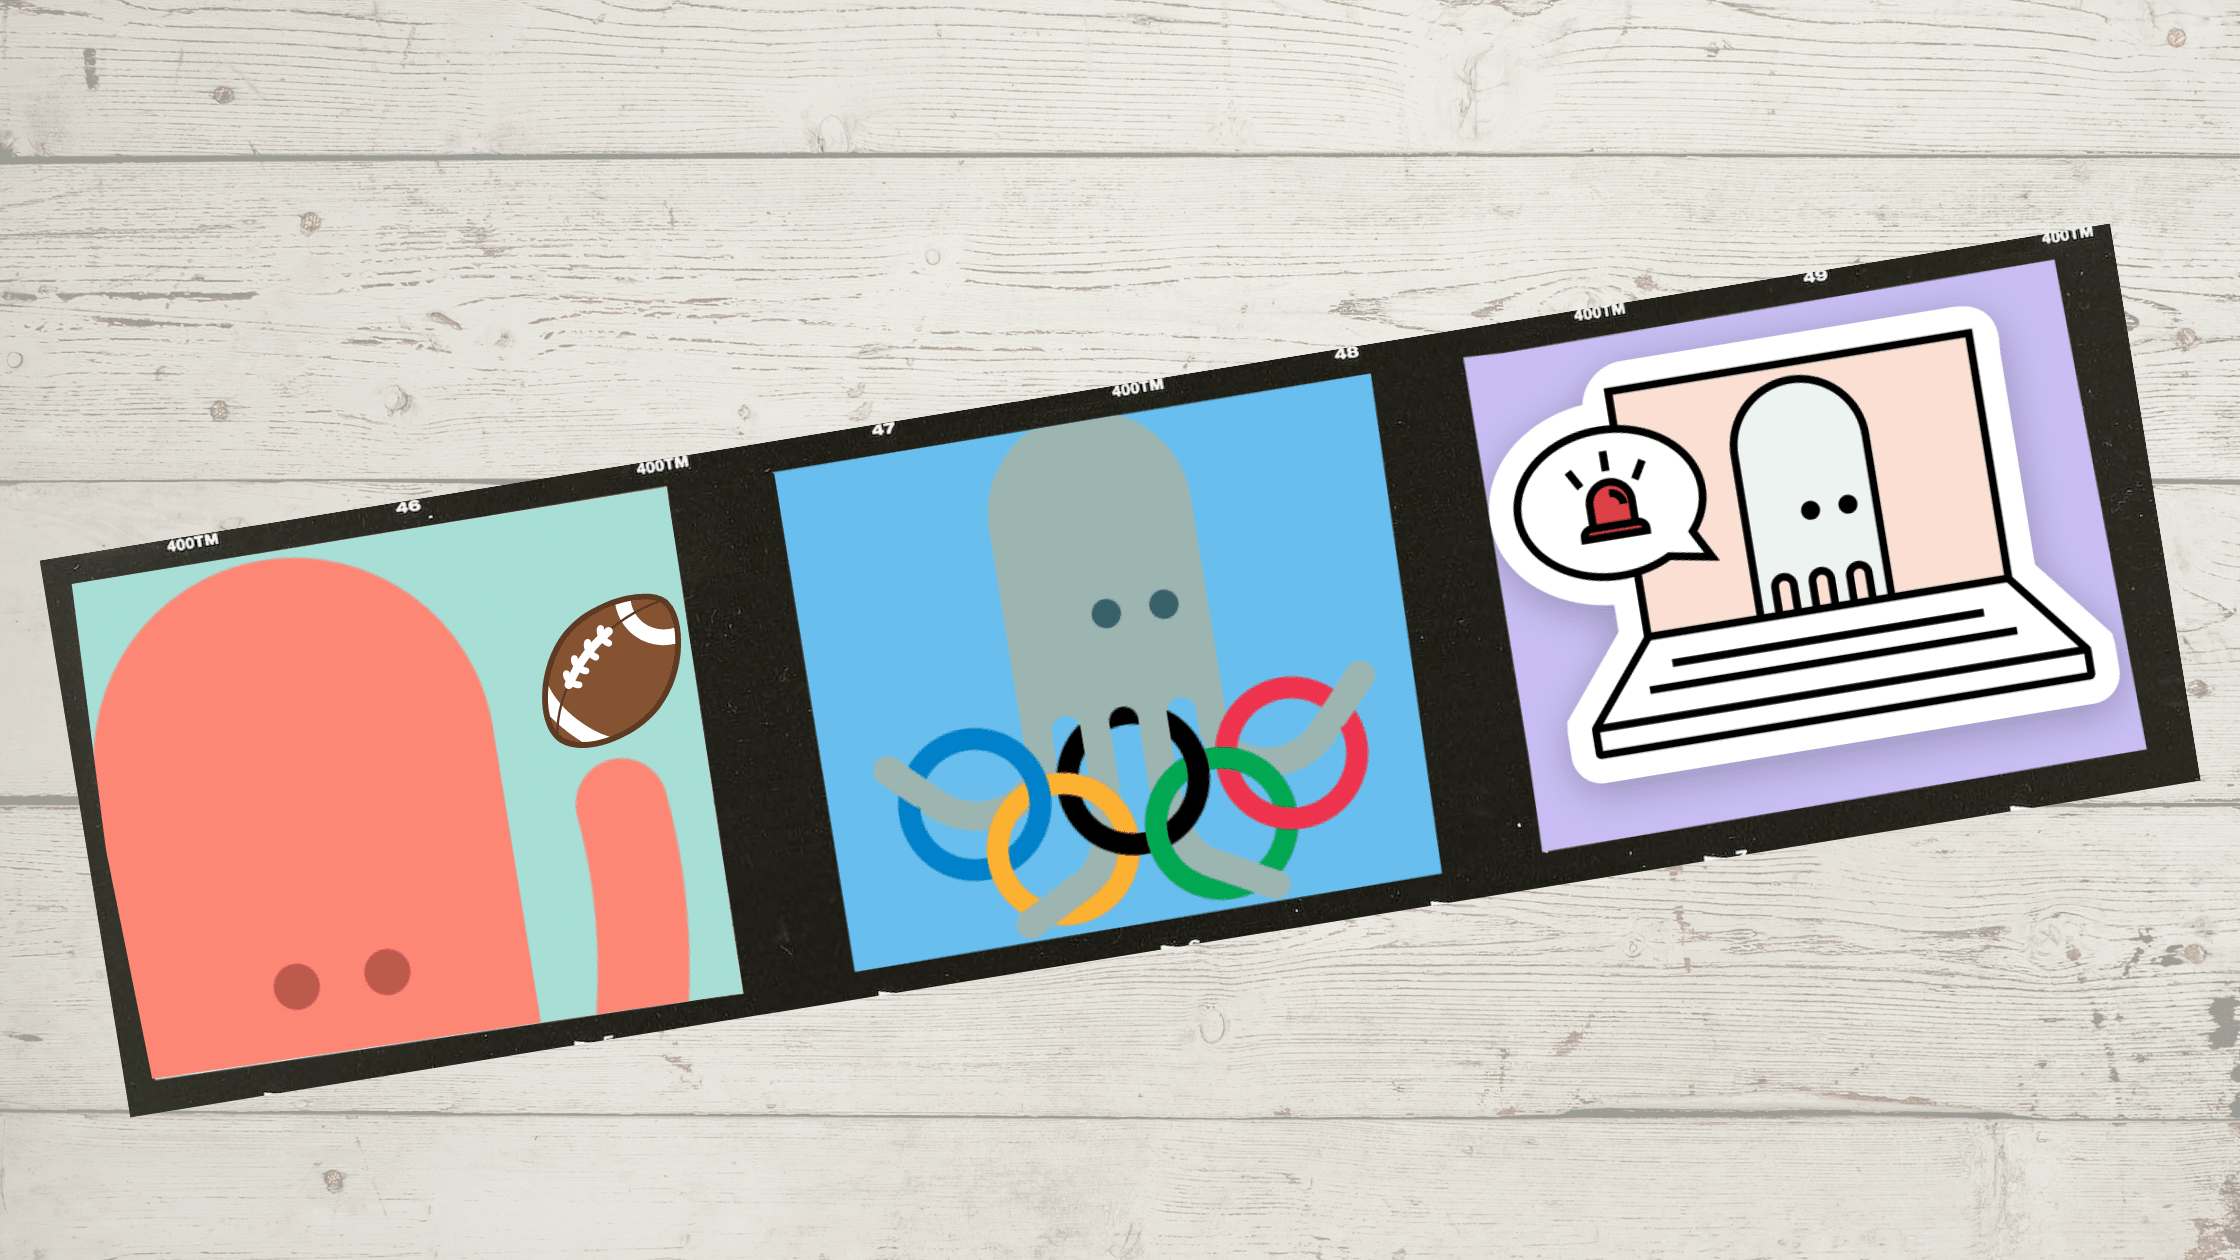 3 pictures of iggy the octopus: one playing american football, one with olympic rings, and one showing an alert on a laptop